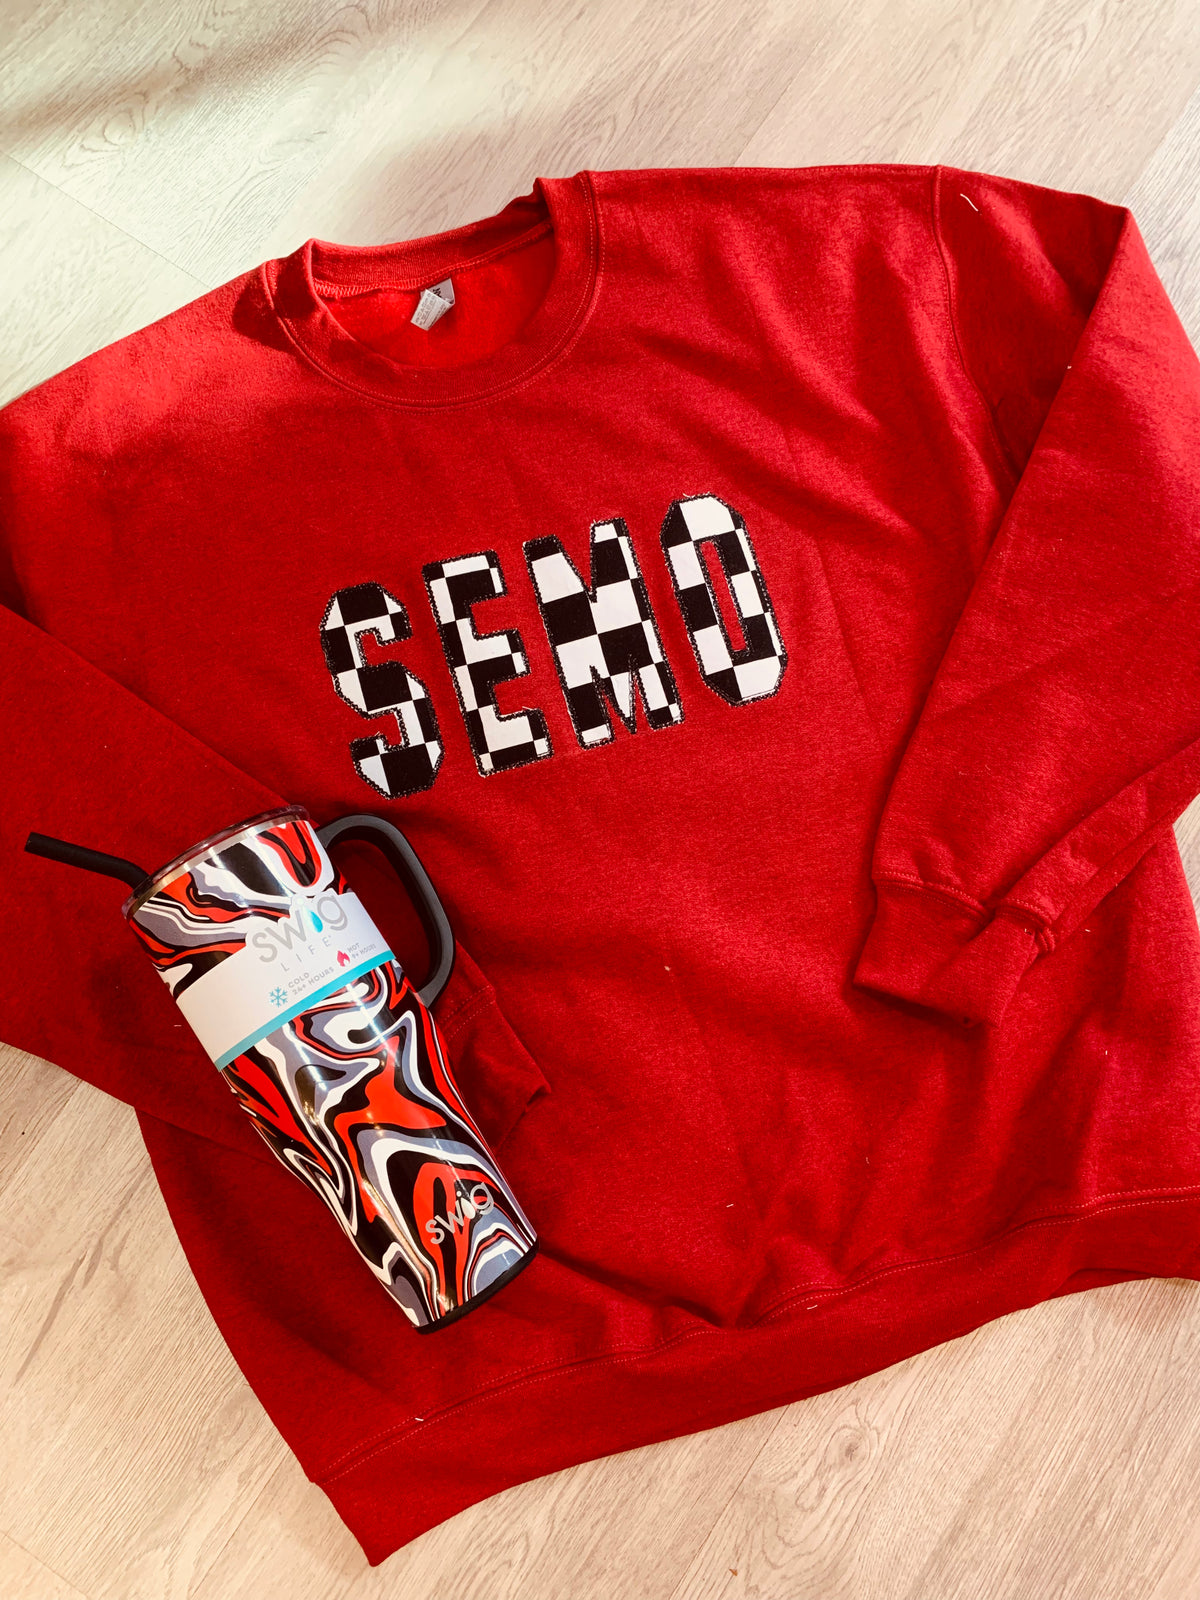 SEMO Embroidered Checkered Sweatshirt-243 Custom-Peachy Keen Boutique-Peachy Keen Boutique, Women's Fashion Boutique, Located in Cape Girardeau and Dexter, MO